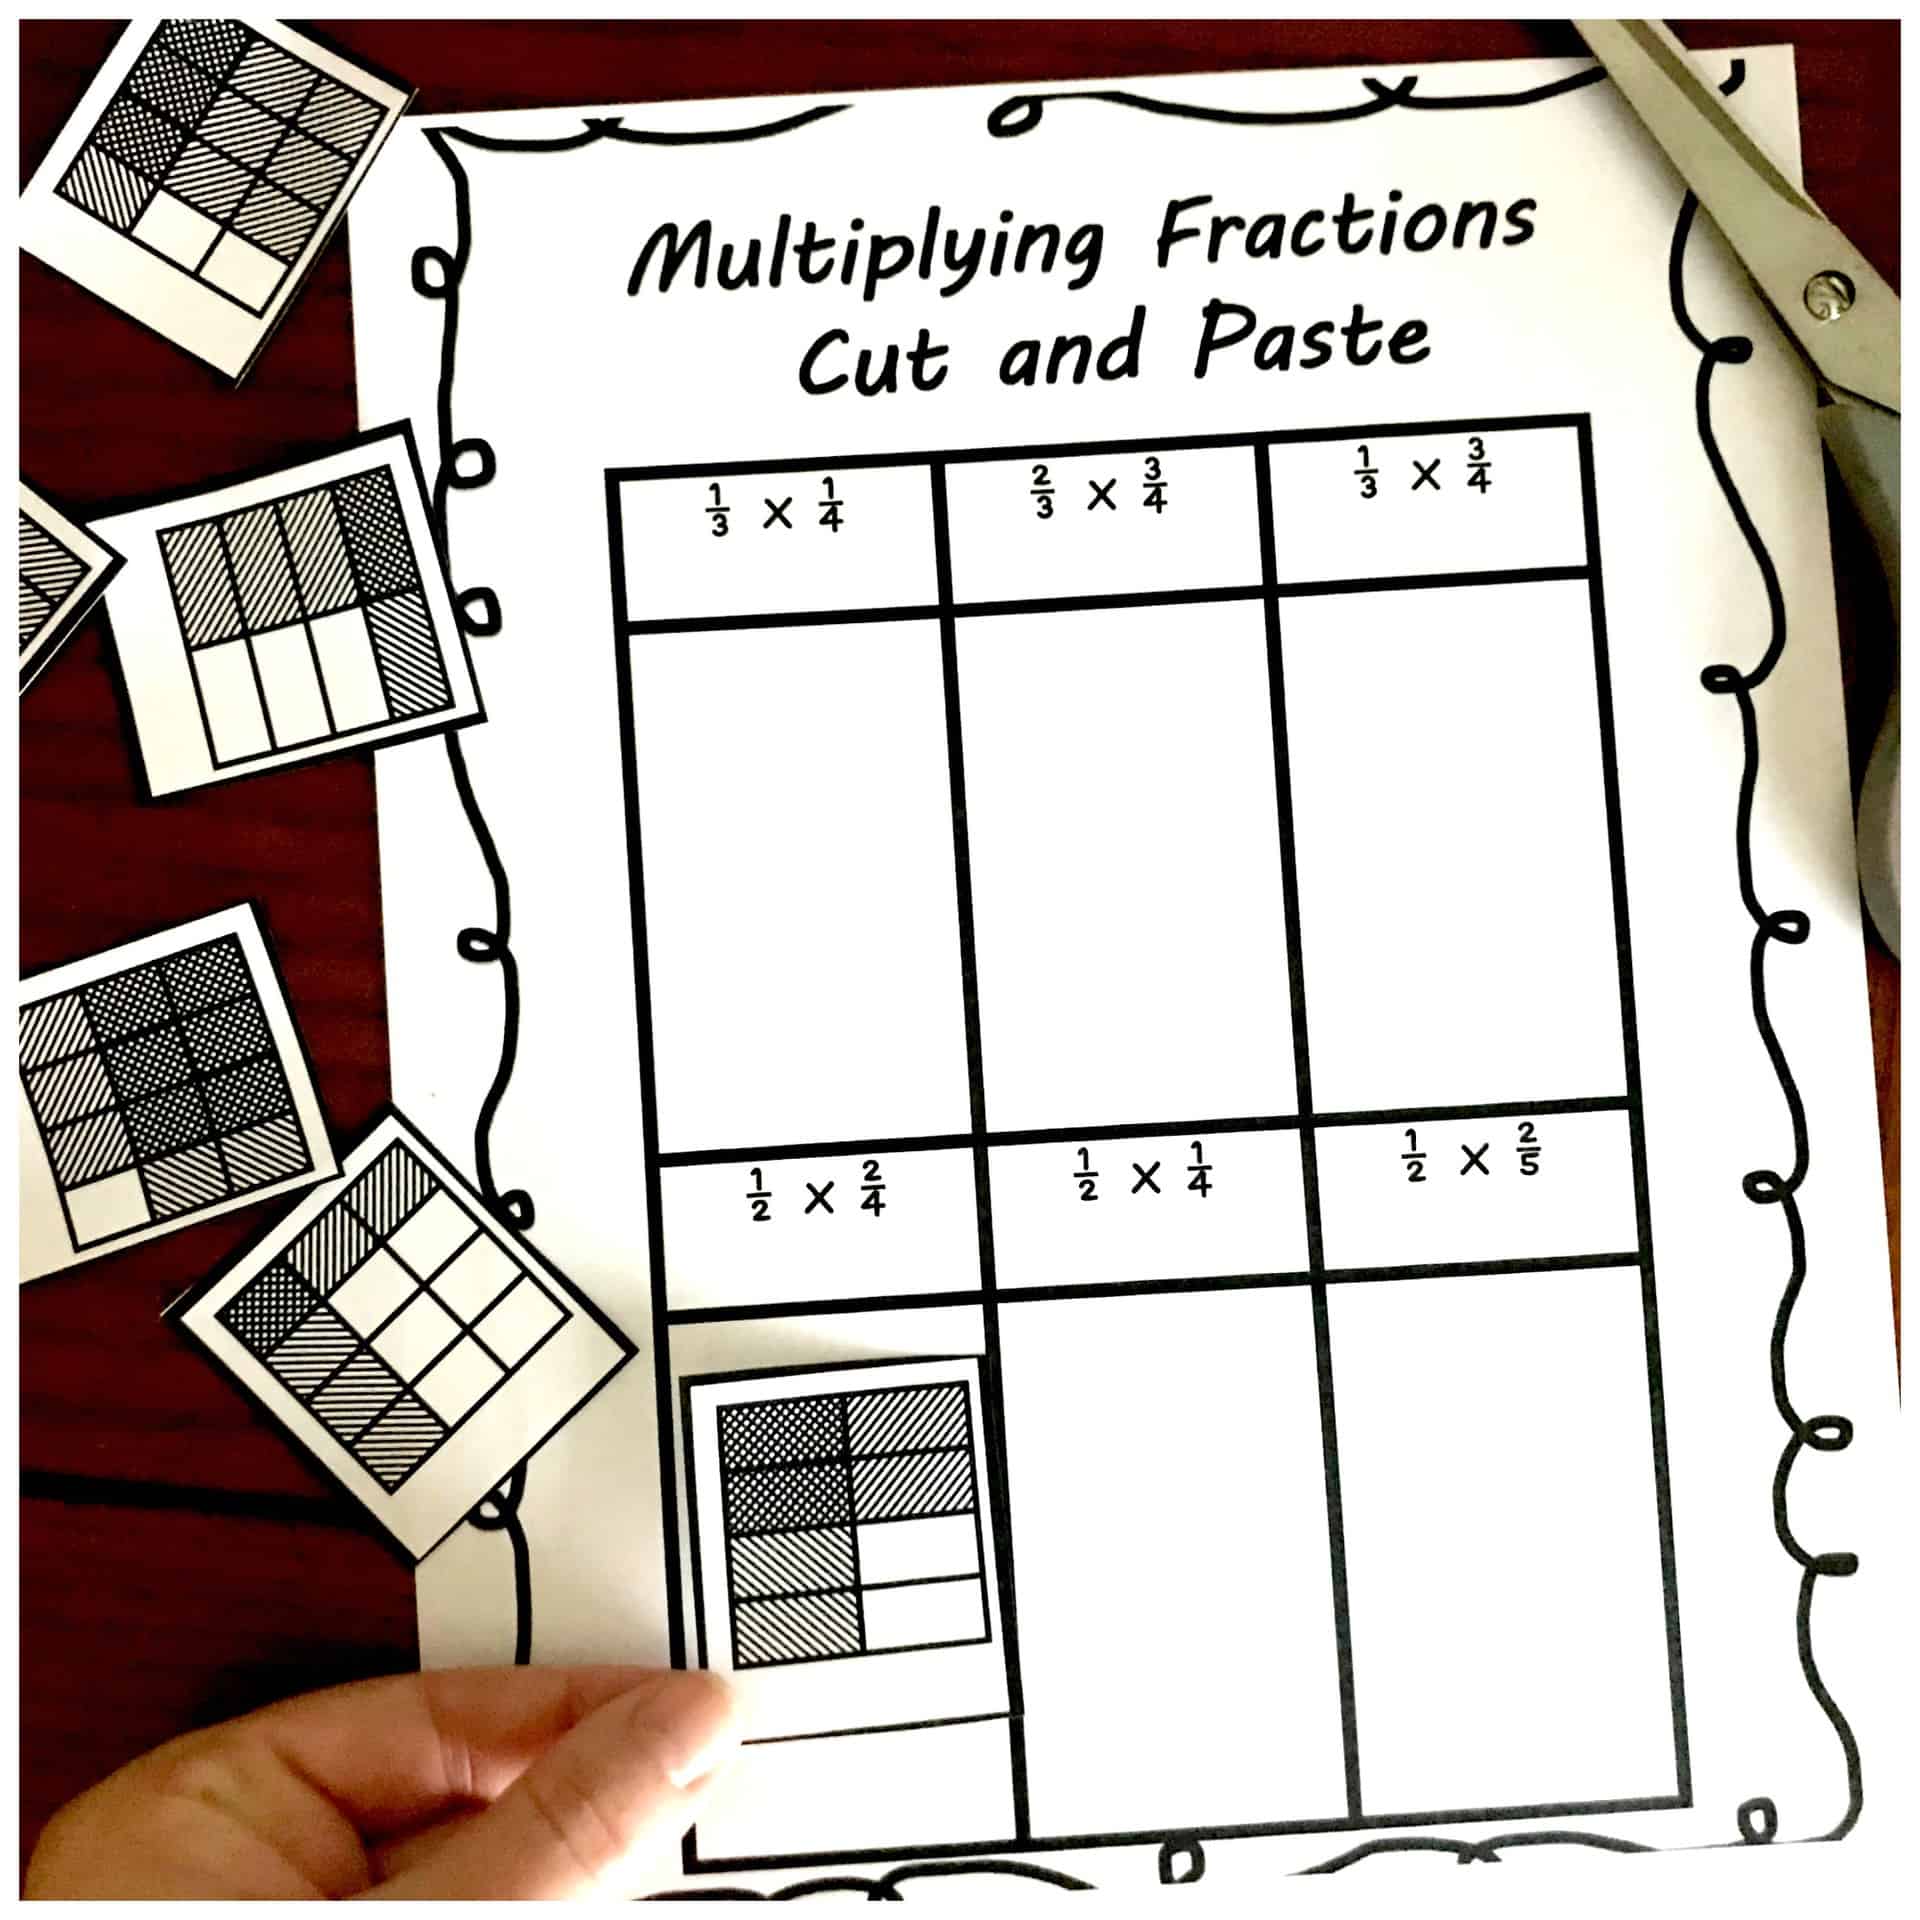 3 Cut and Paste Worksheets For Multiplying Fractions Practice